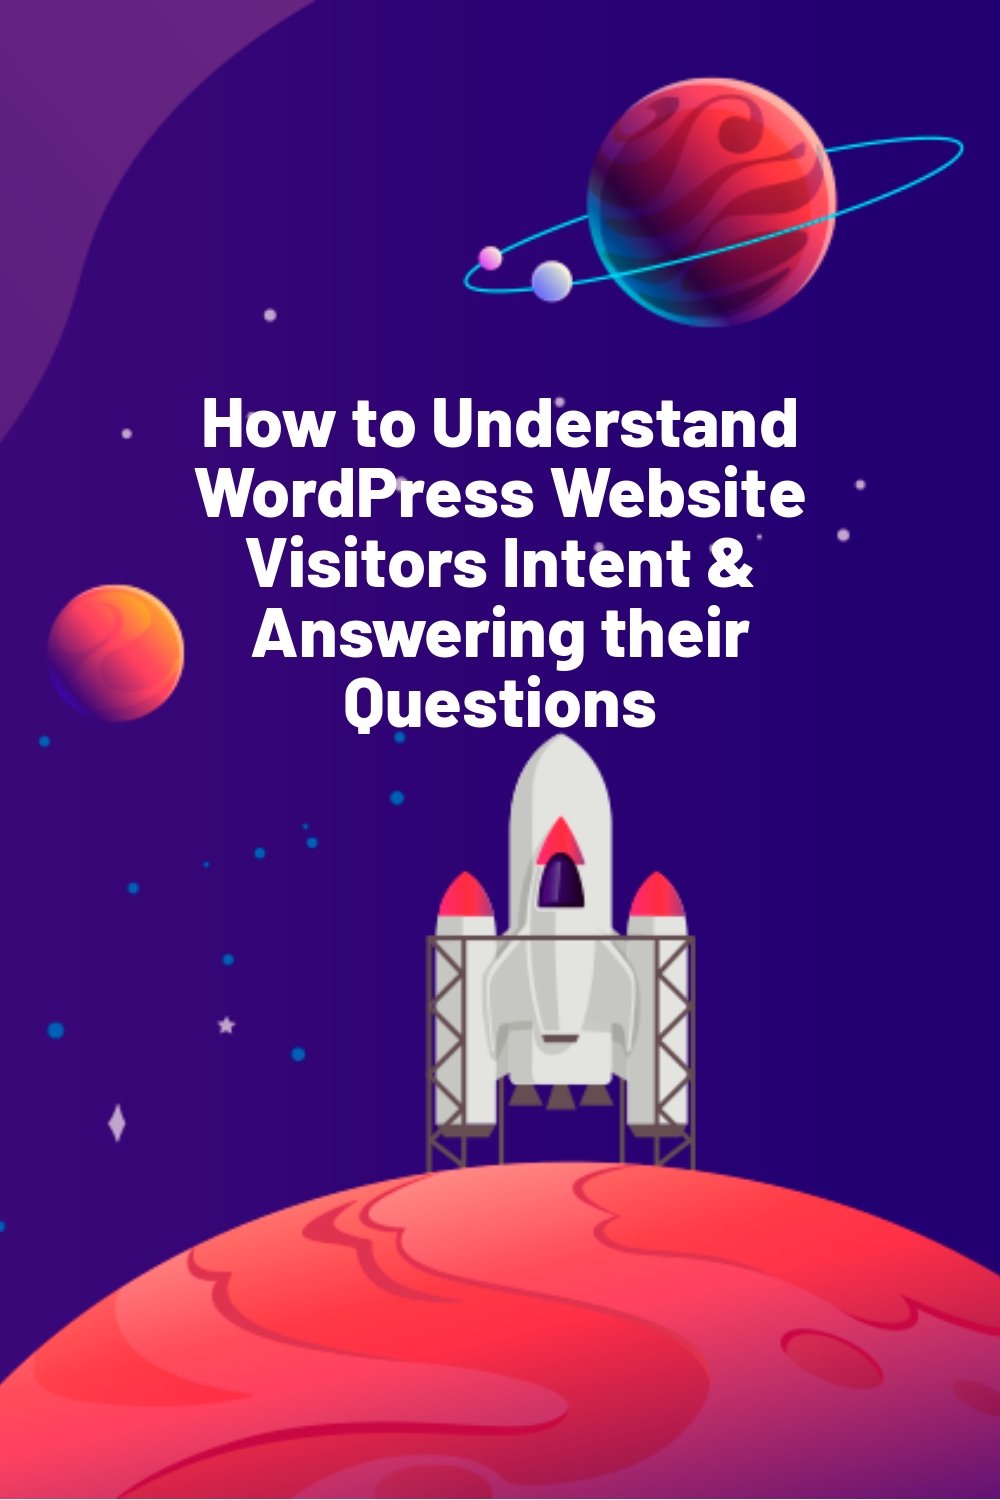 How to Understand WordPress Website Visitors Intent & Answering their Questions